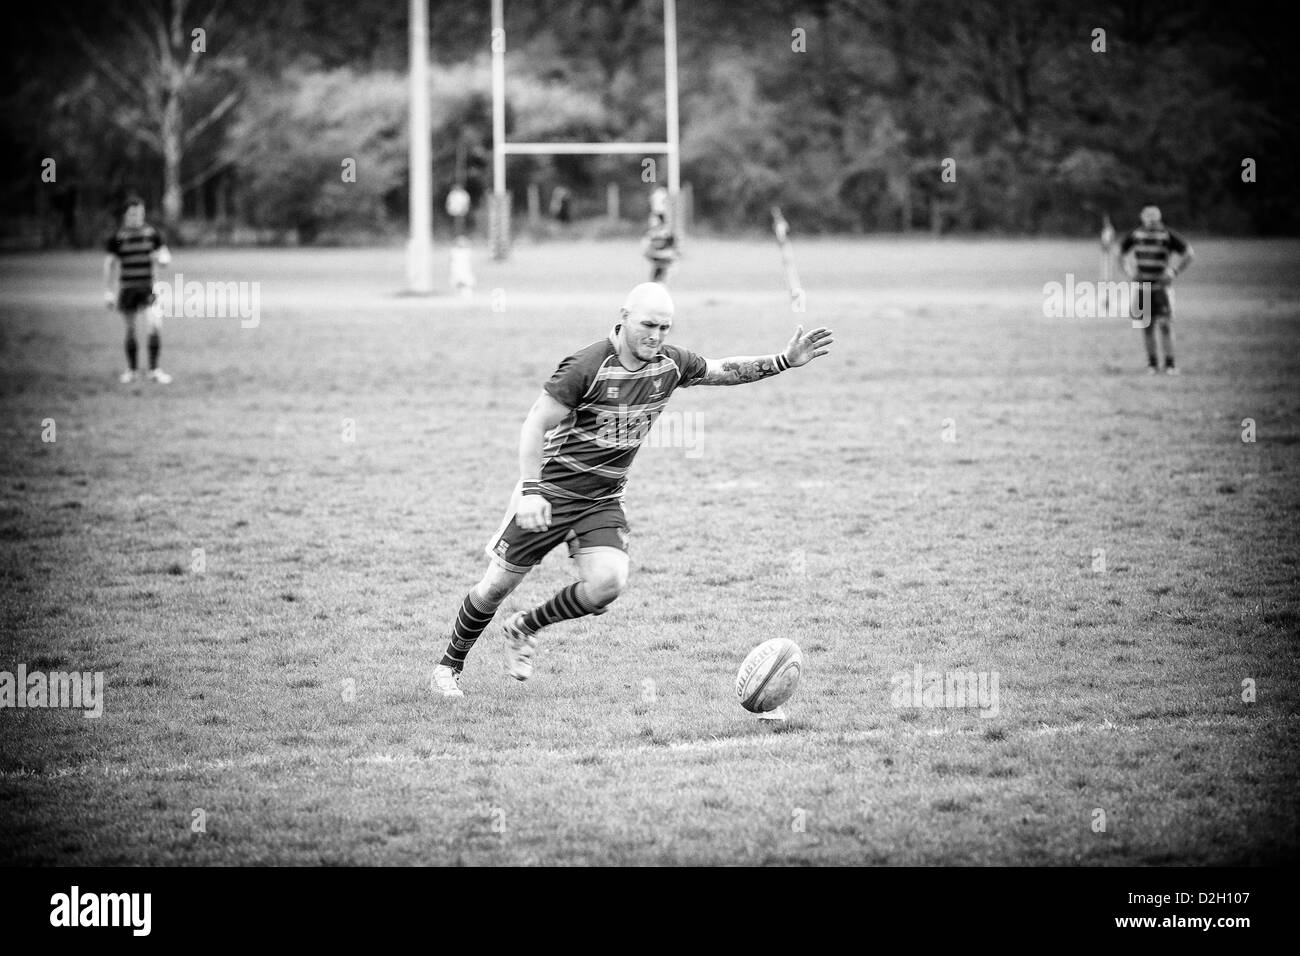 Rugby player running up to kick the ball Stock Photo